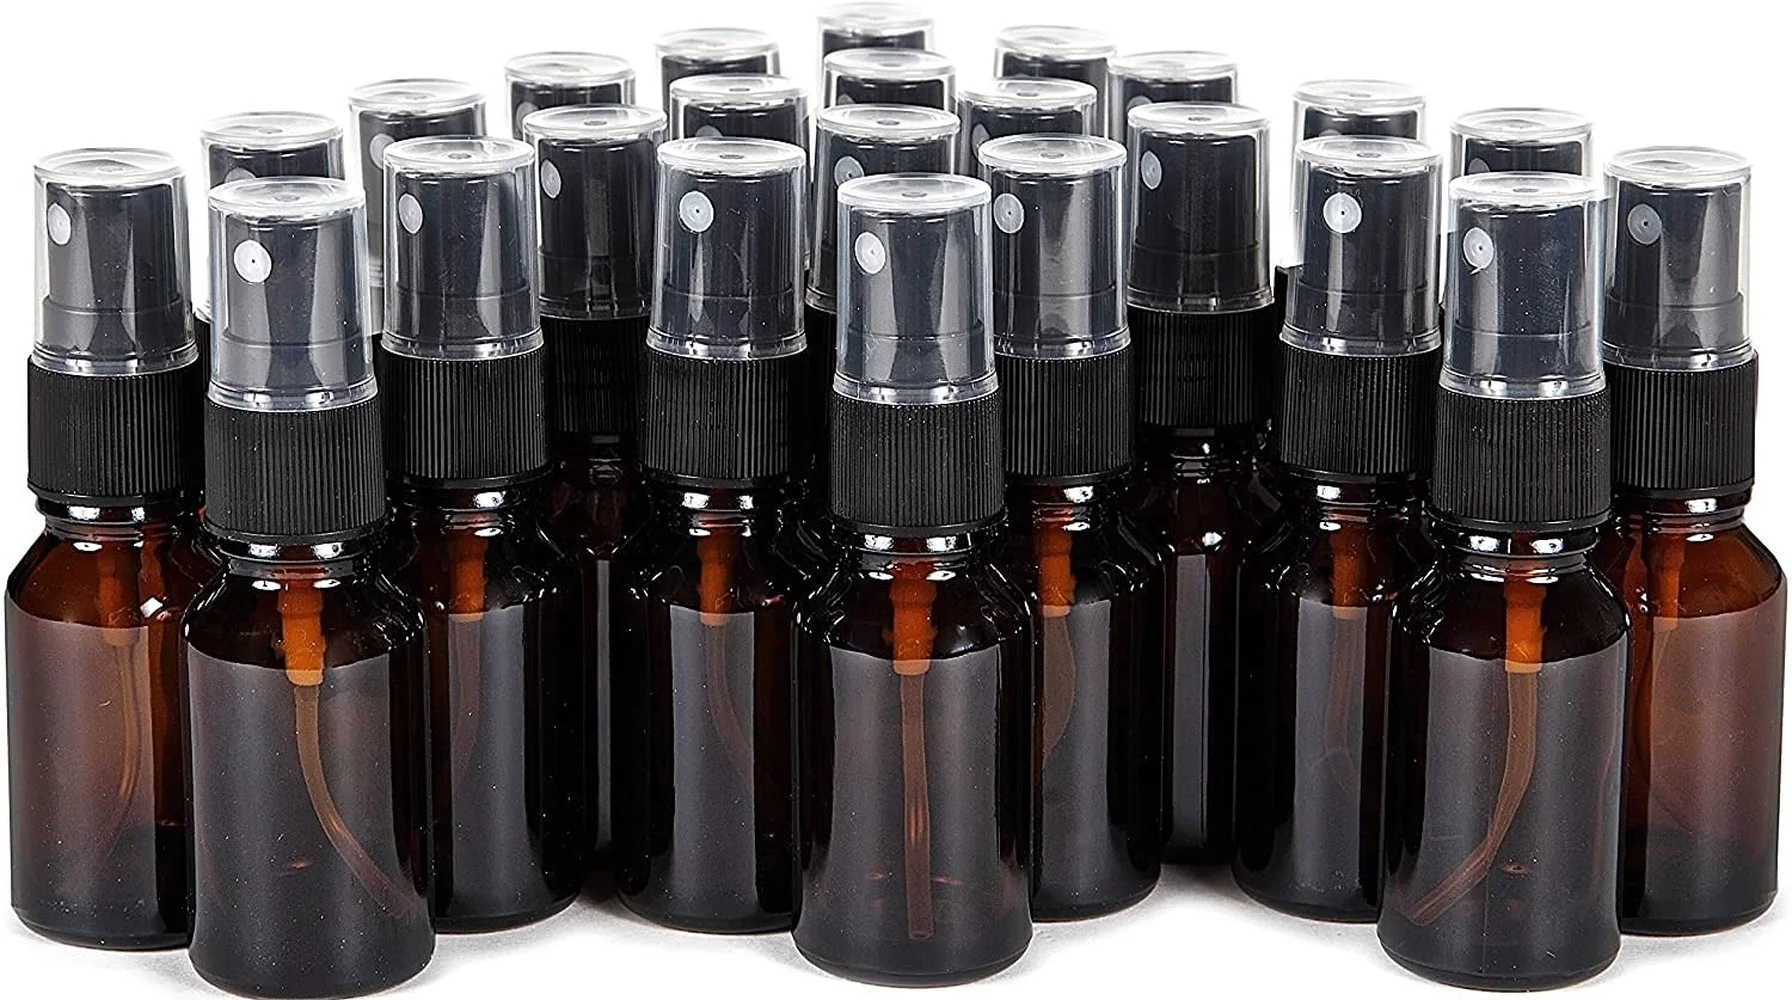 

24Pcs 15ml Travel Size Amber Glass Fine Mist Spray Bottles Cosmetic Containers with Black Sprayers for Essential Oils Cleaning